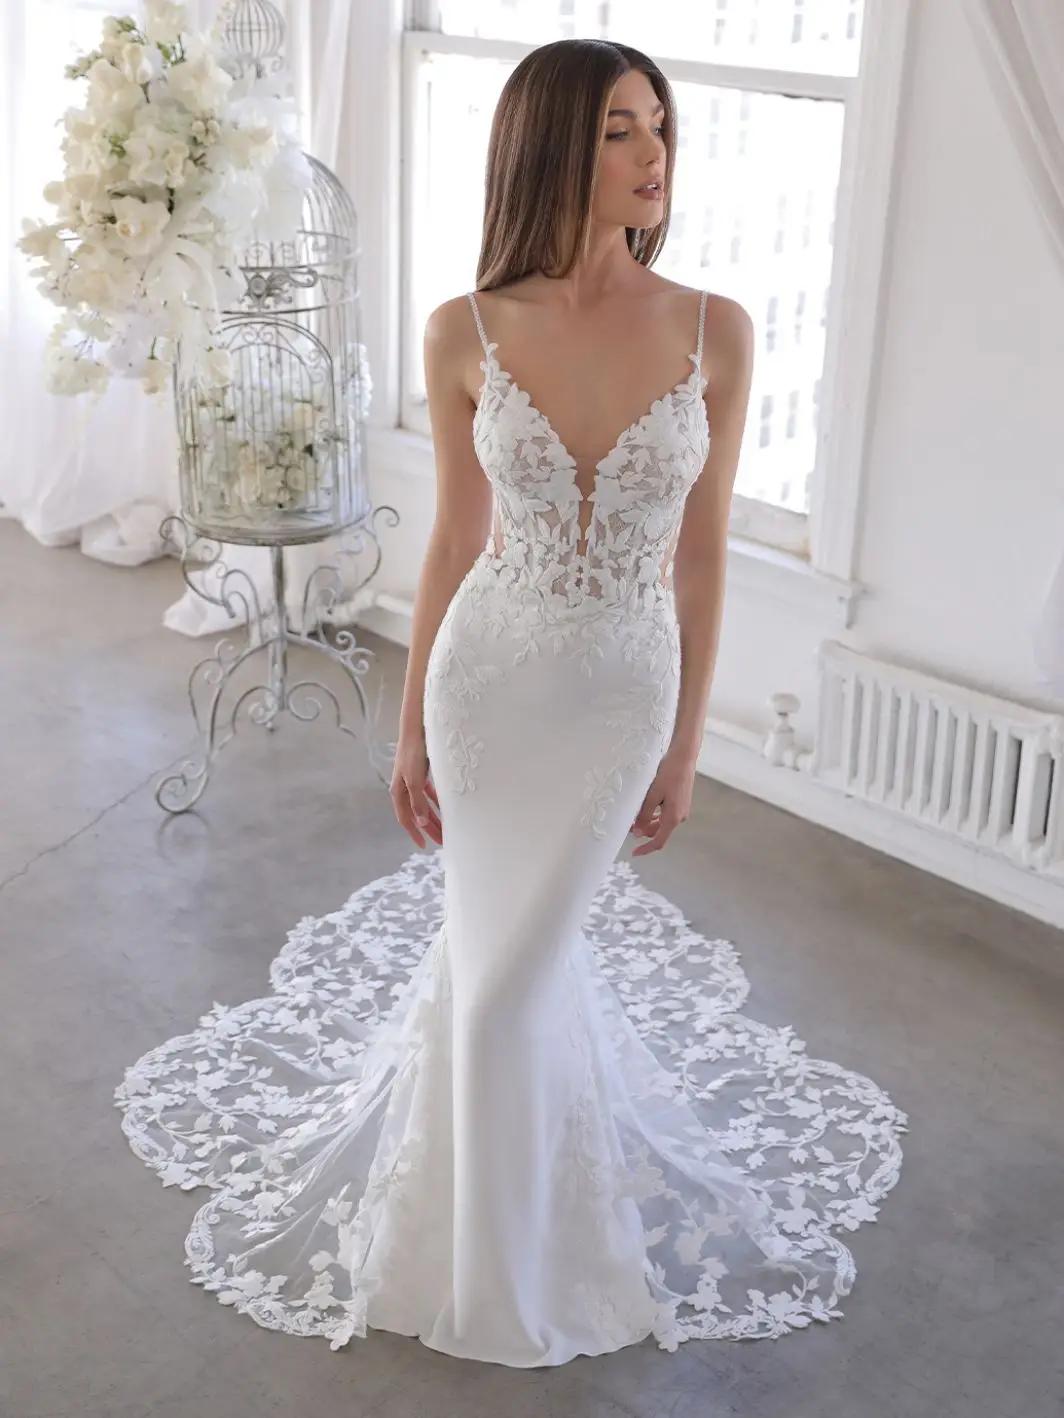 WOW! New wedding dresses now in! Image